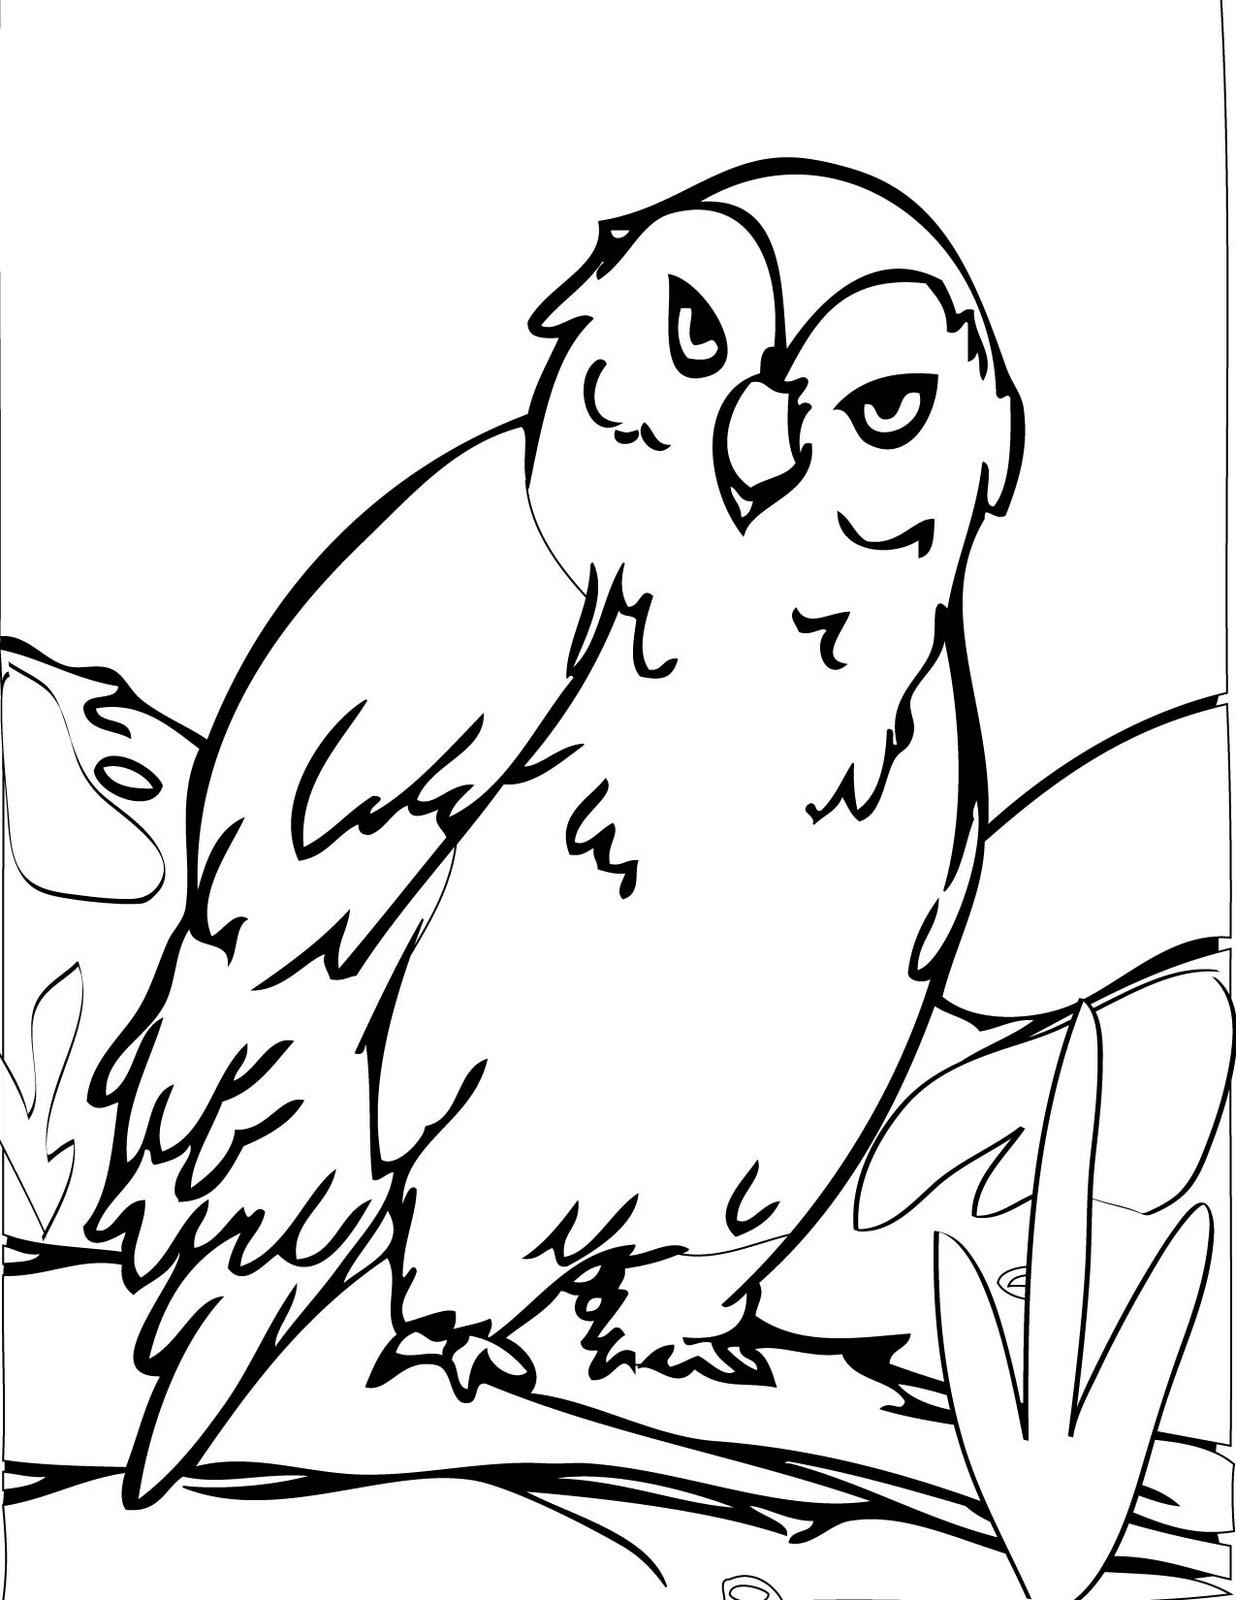 Download Owls Animal Coloring Pages Pictures